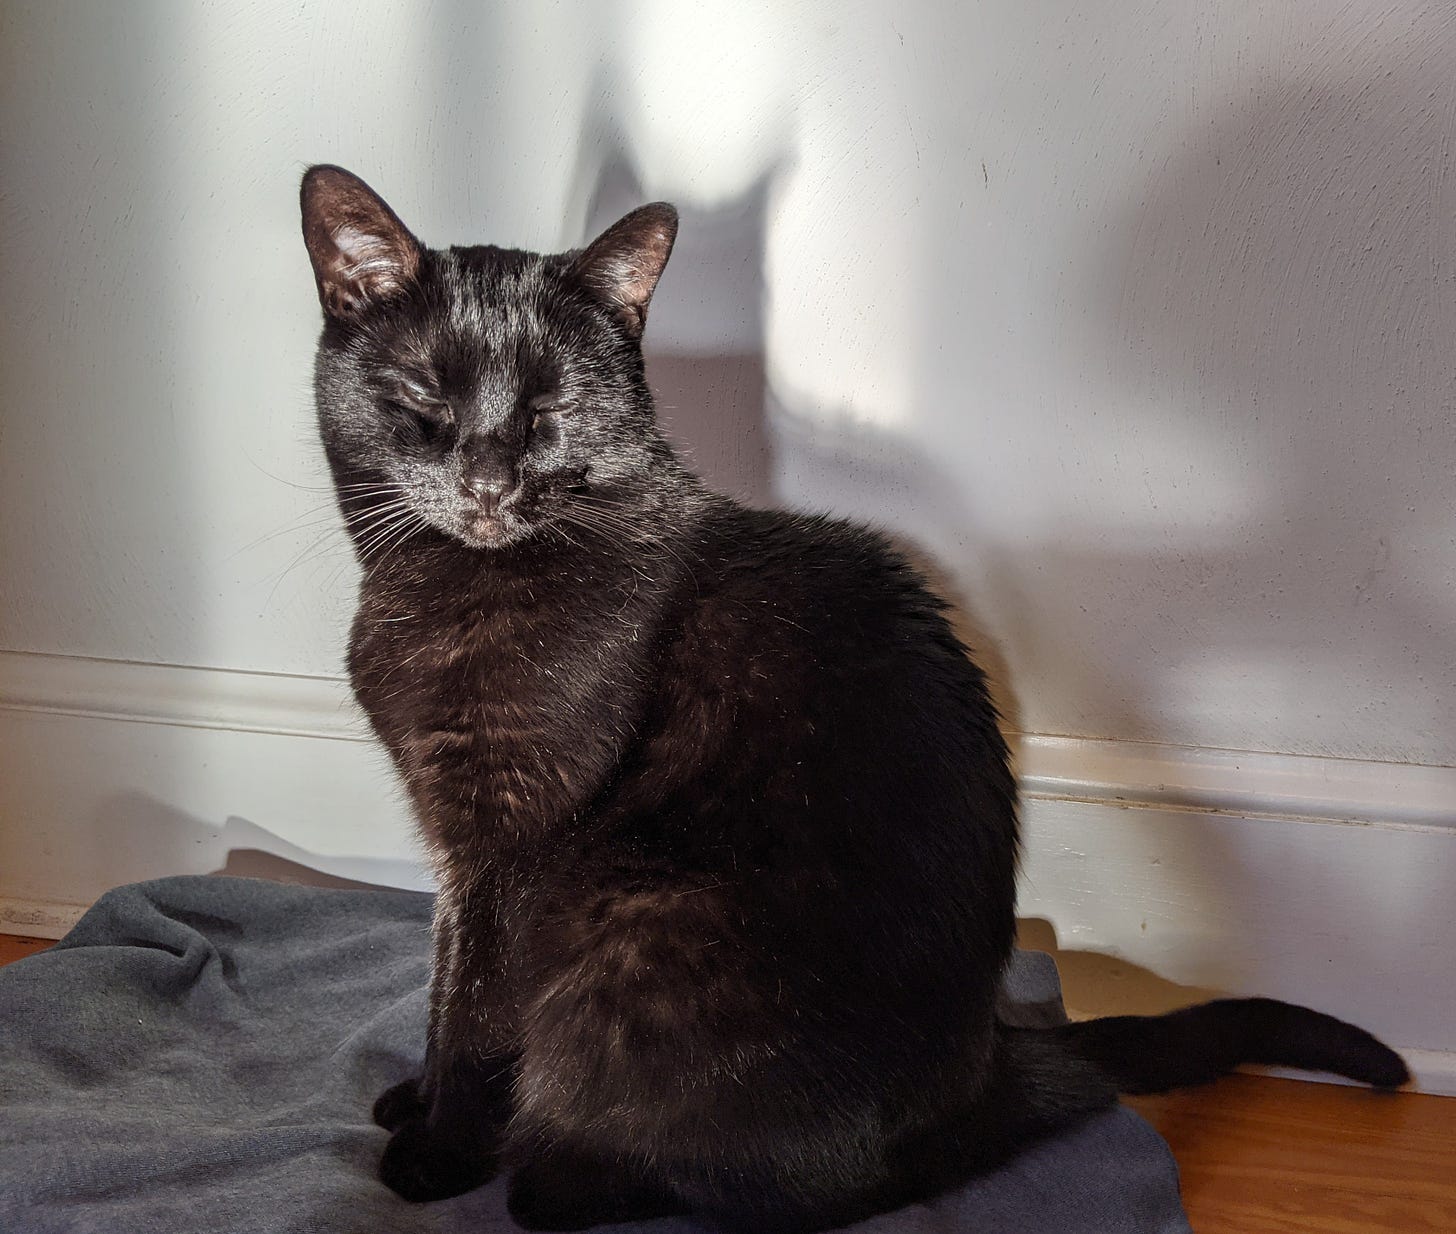 A black cat, eyes closed, is dramatically lit by a sunbeam as he sits on a gray sweatshirt on the floor against a white wall.